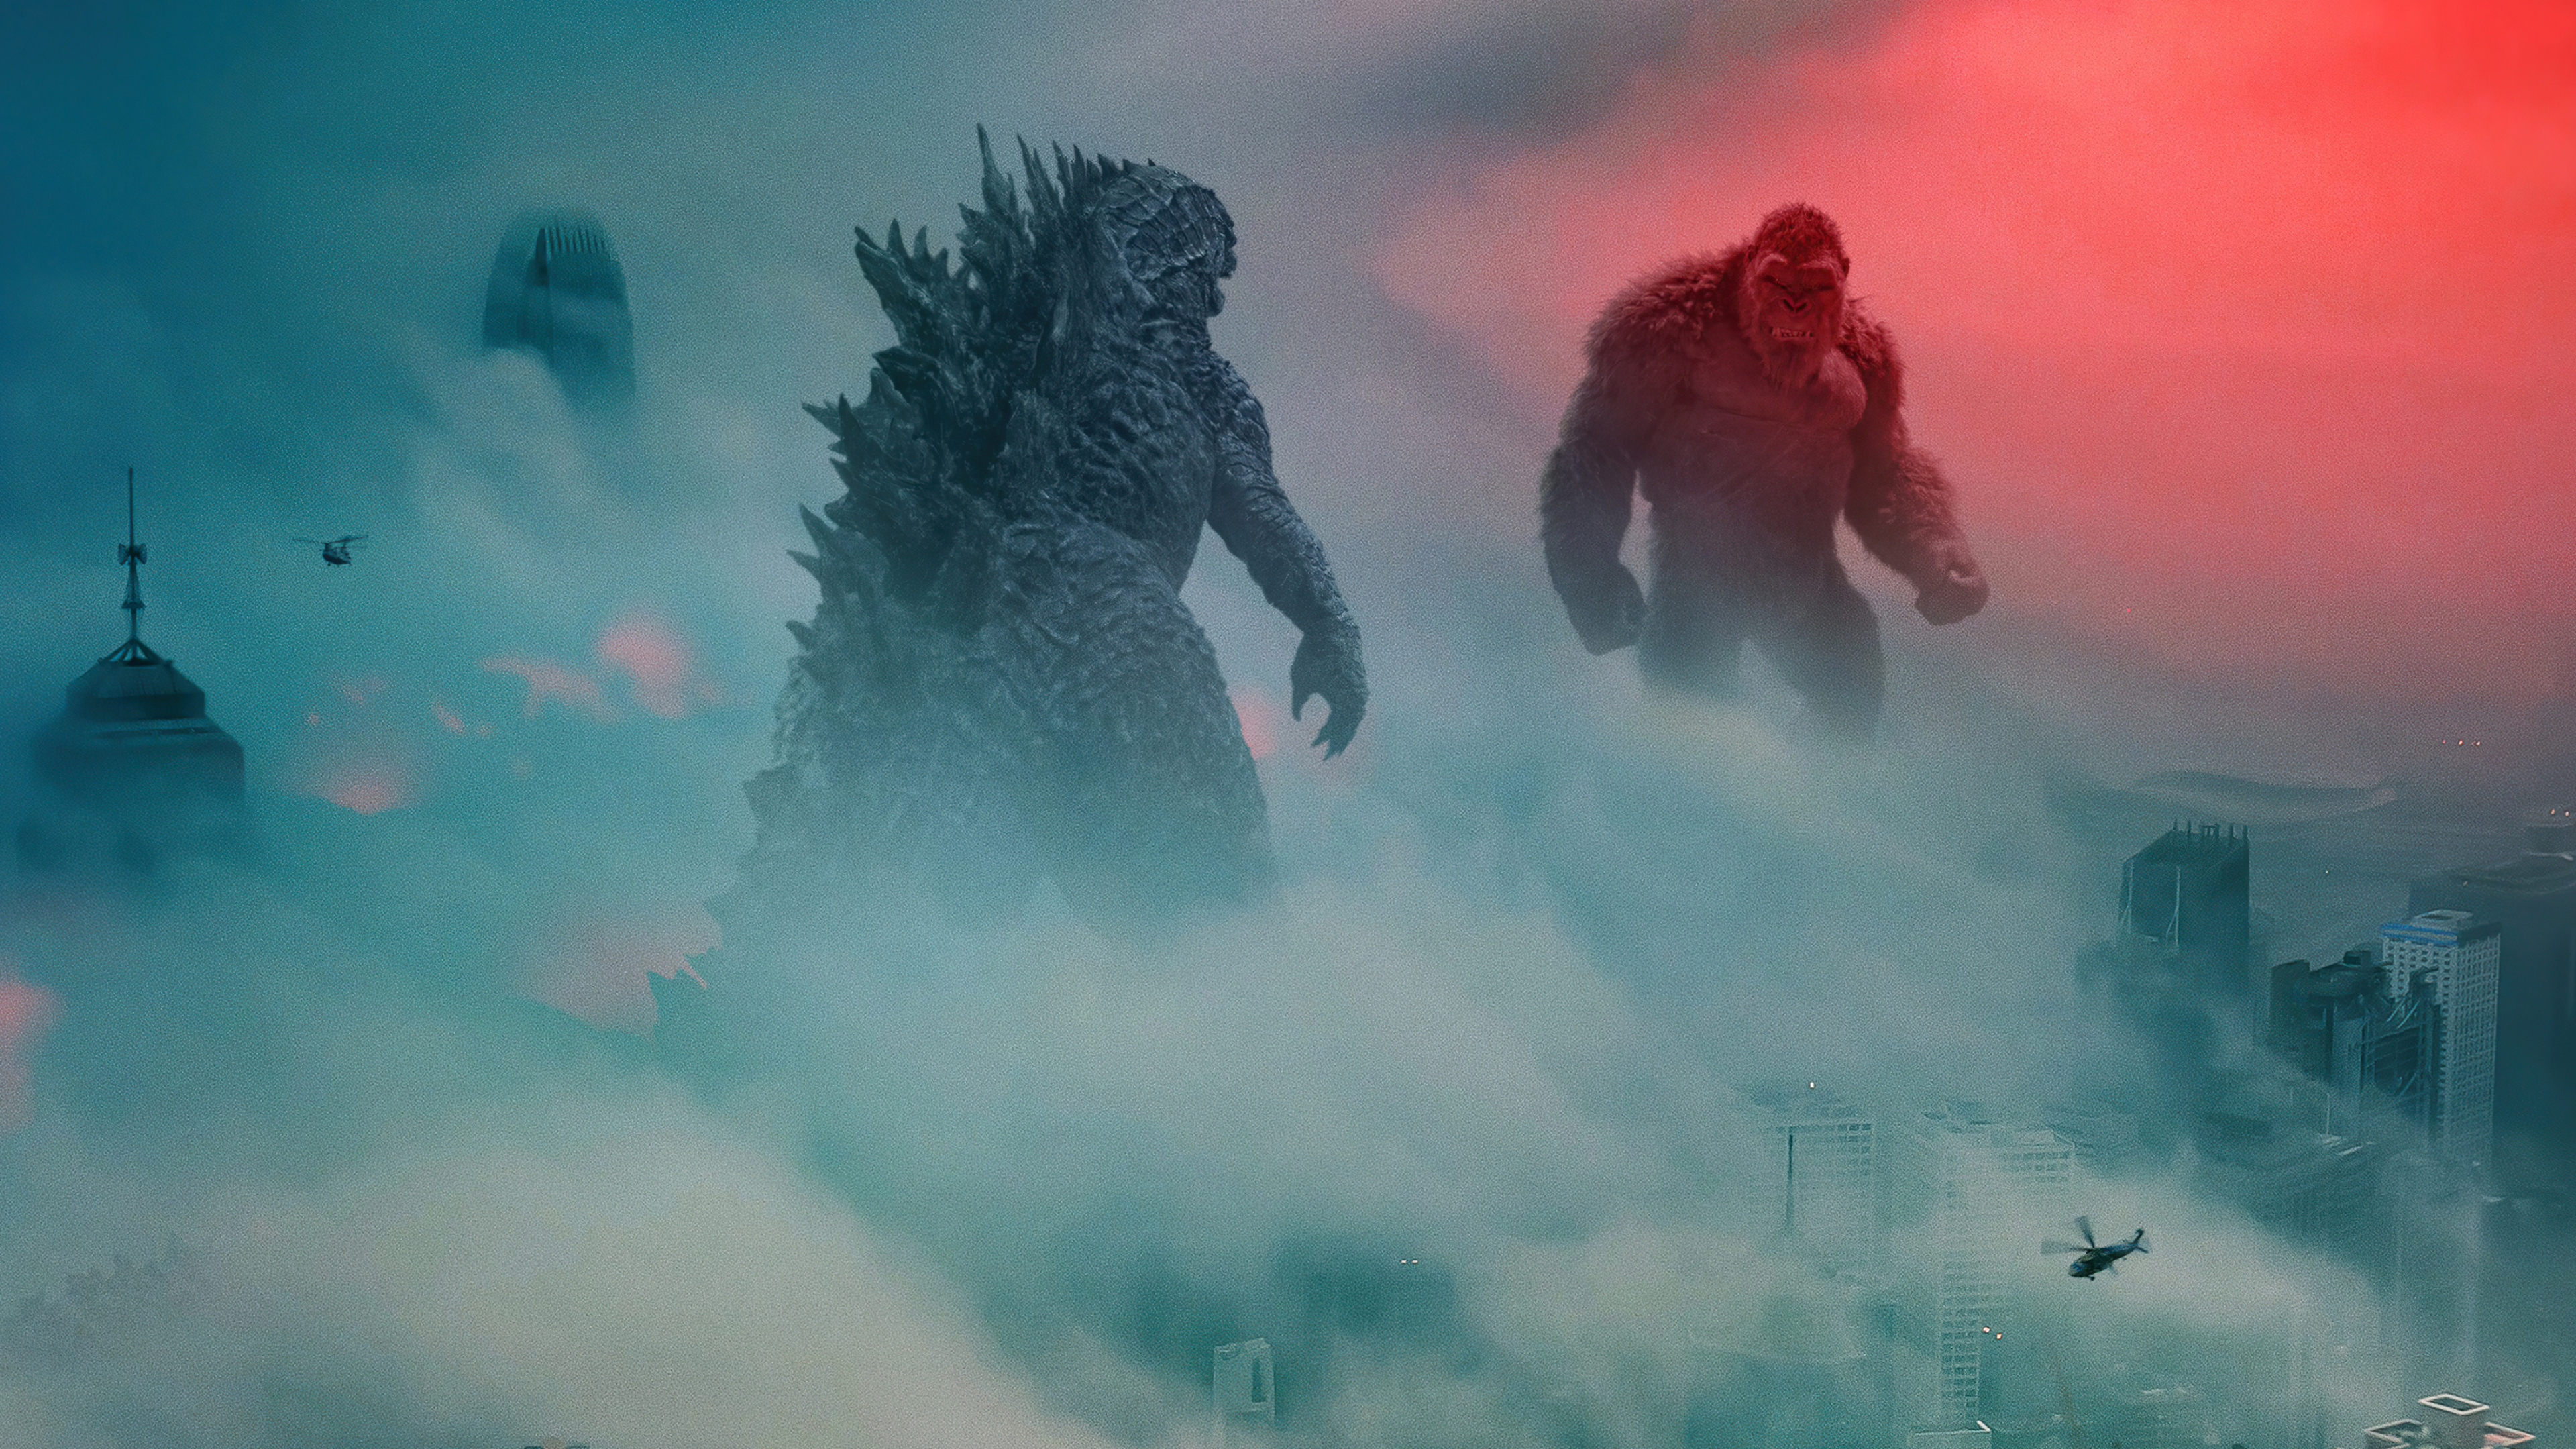 King Kong: Encountered characters from other franchises such as the Toho movie monster Godzilla. 3840x2160 4K Wallpaper.